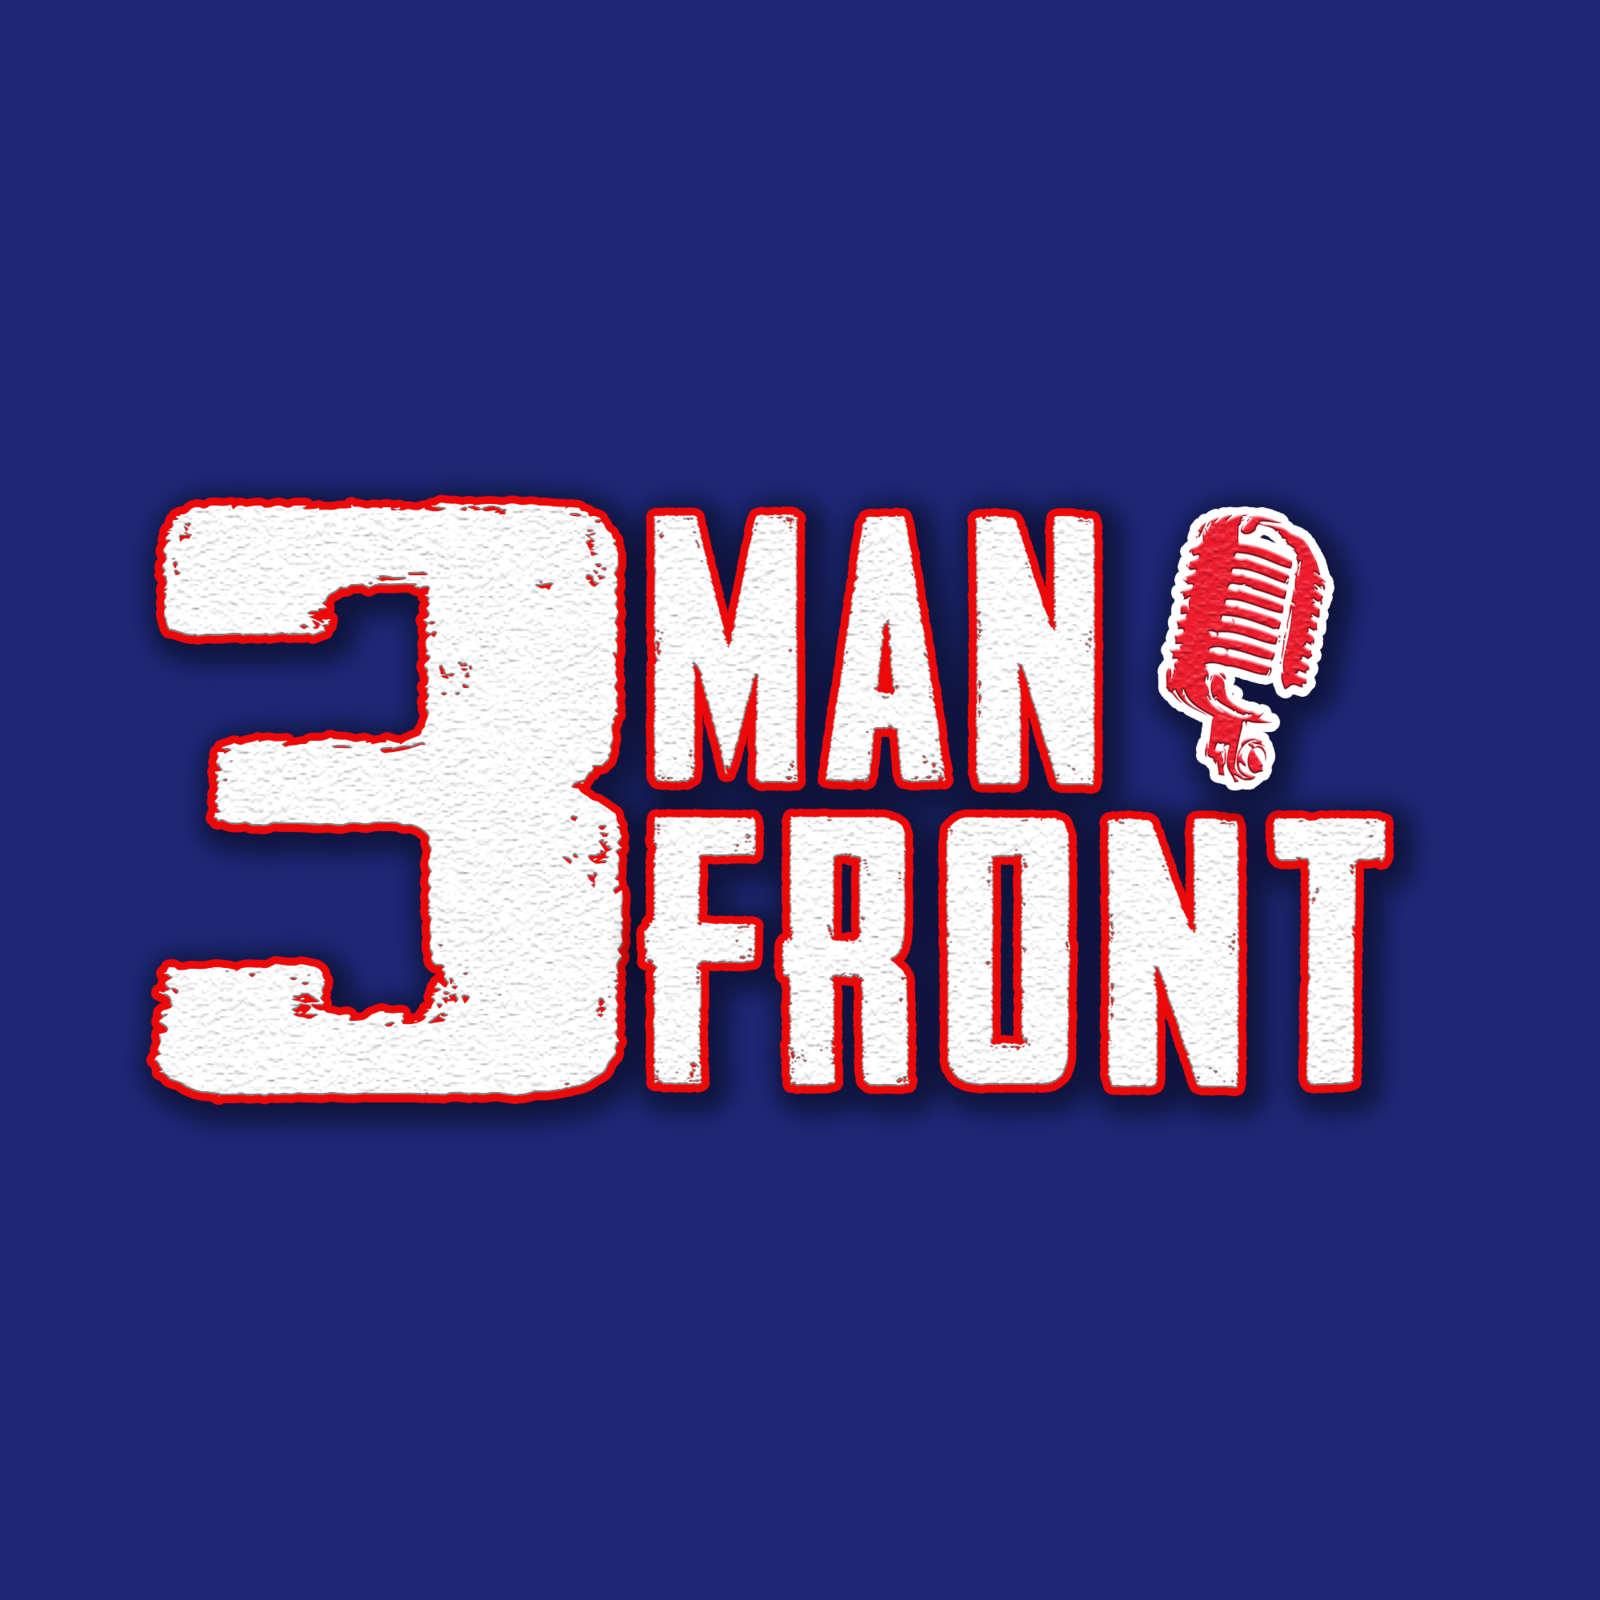 6-19-24 3 Man Front Hour 4: Listeners join the fun, #PatPonders & CWS